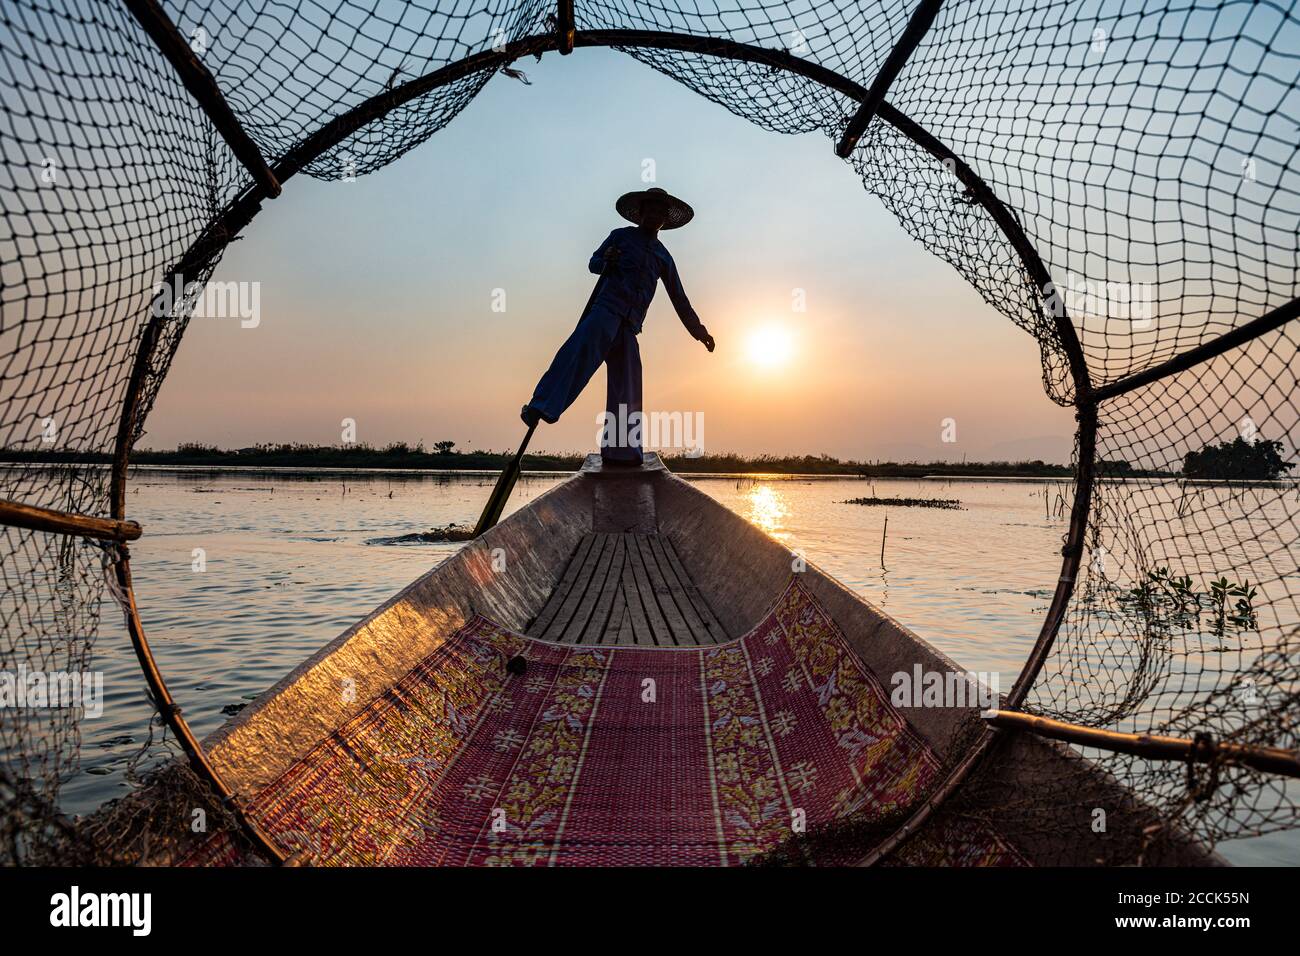 Myanmar, Shan state, Silhouette of traditional Intha fisherman on boat on Inle lake at sunset Stock Photo